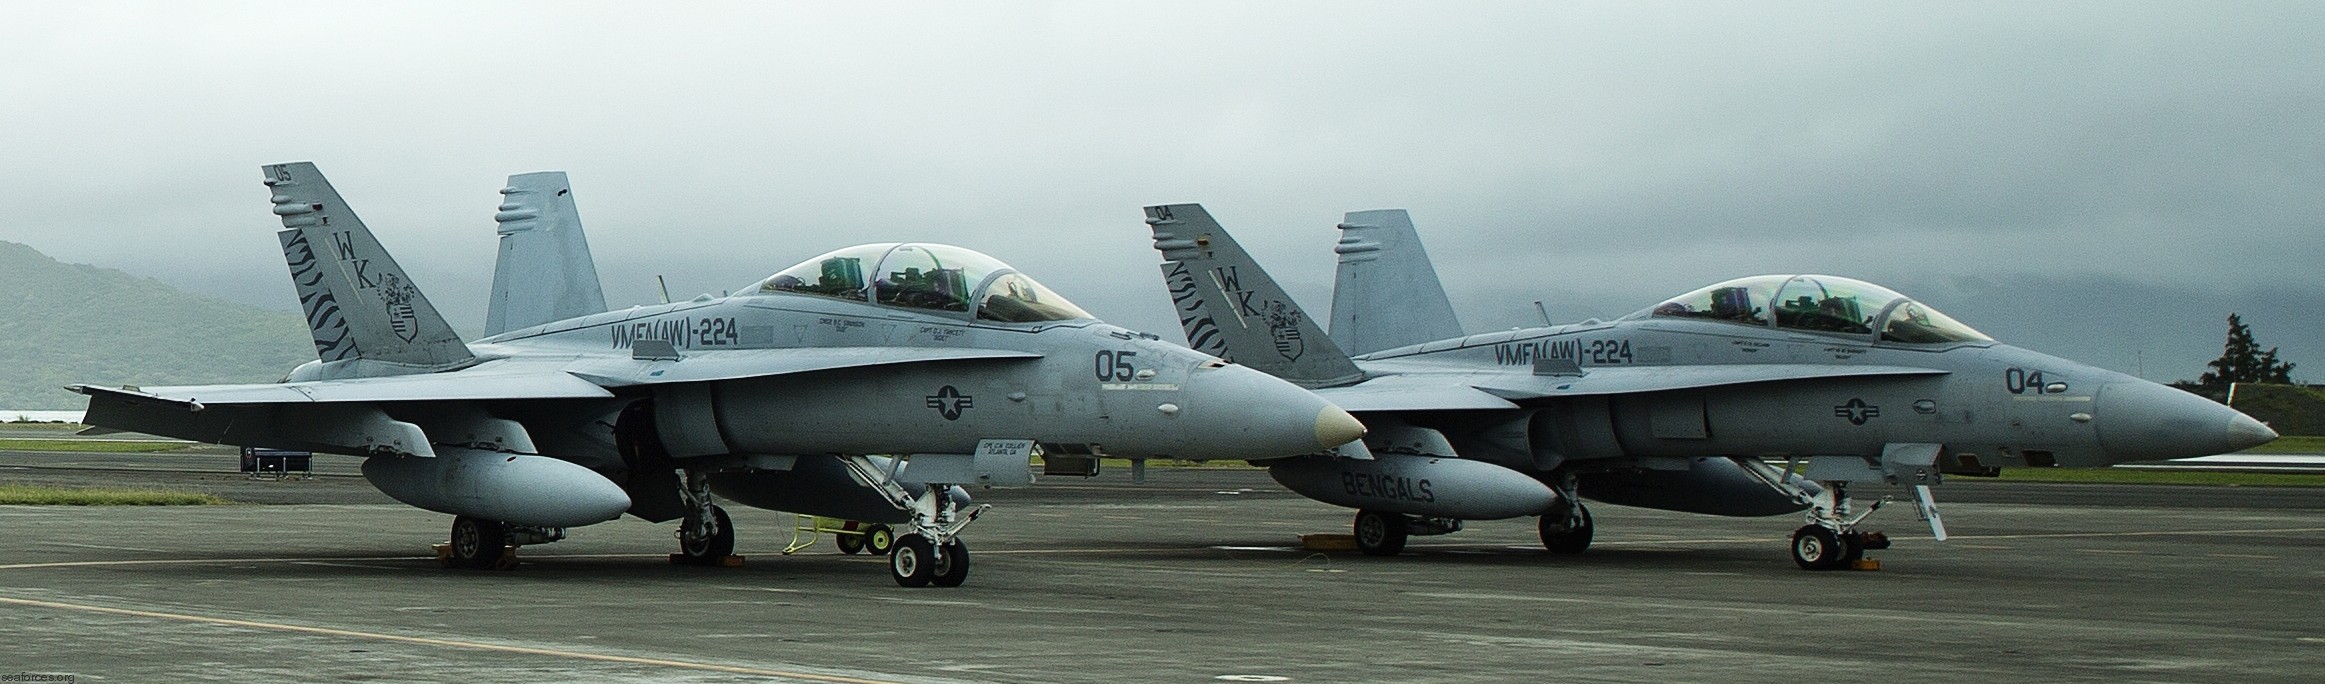 vmfa(aw)-224 bengals marine fighter attack squadron usmc f/a-18d hornet 21